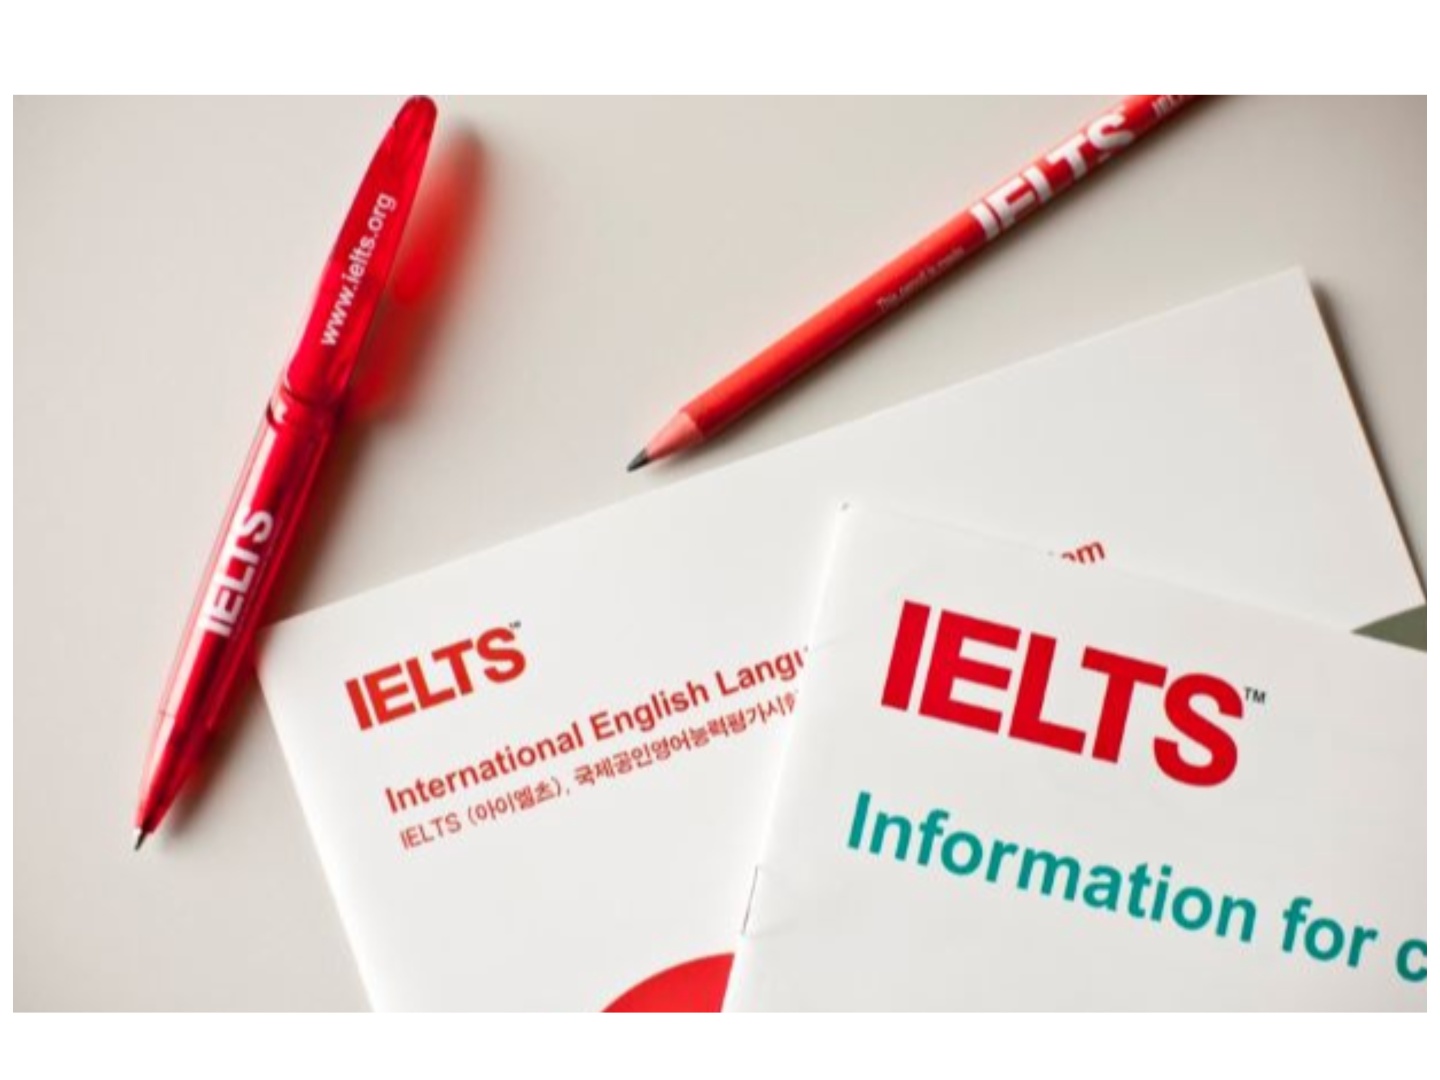 British Council in Nigeria announces fees increase for IELTS